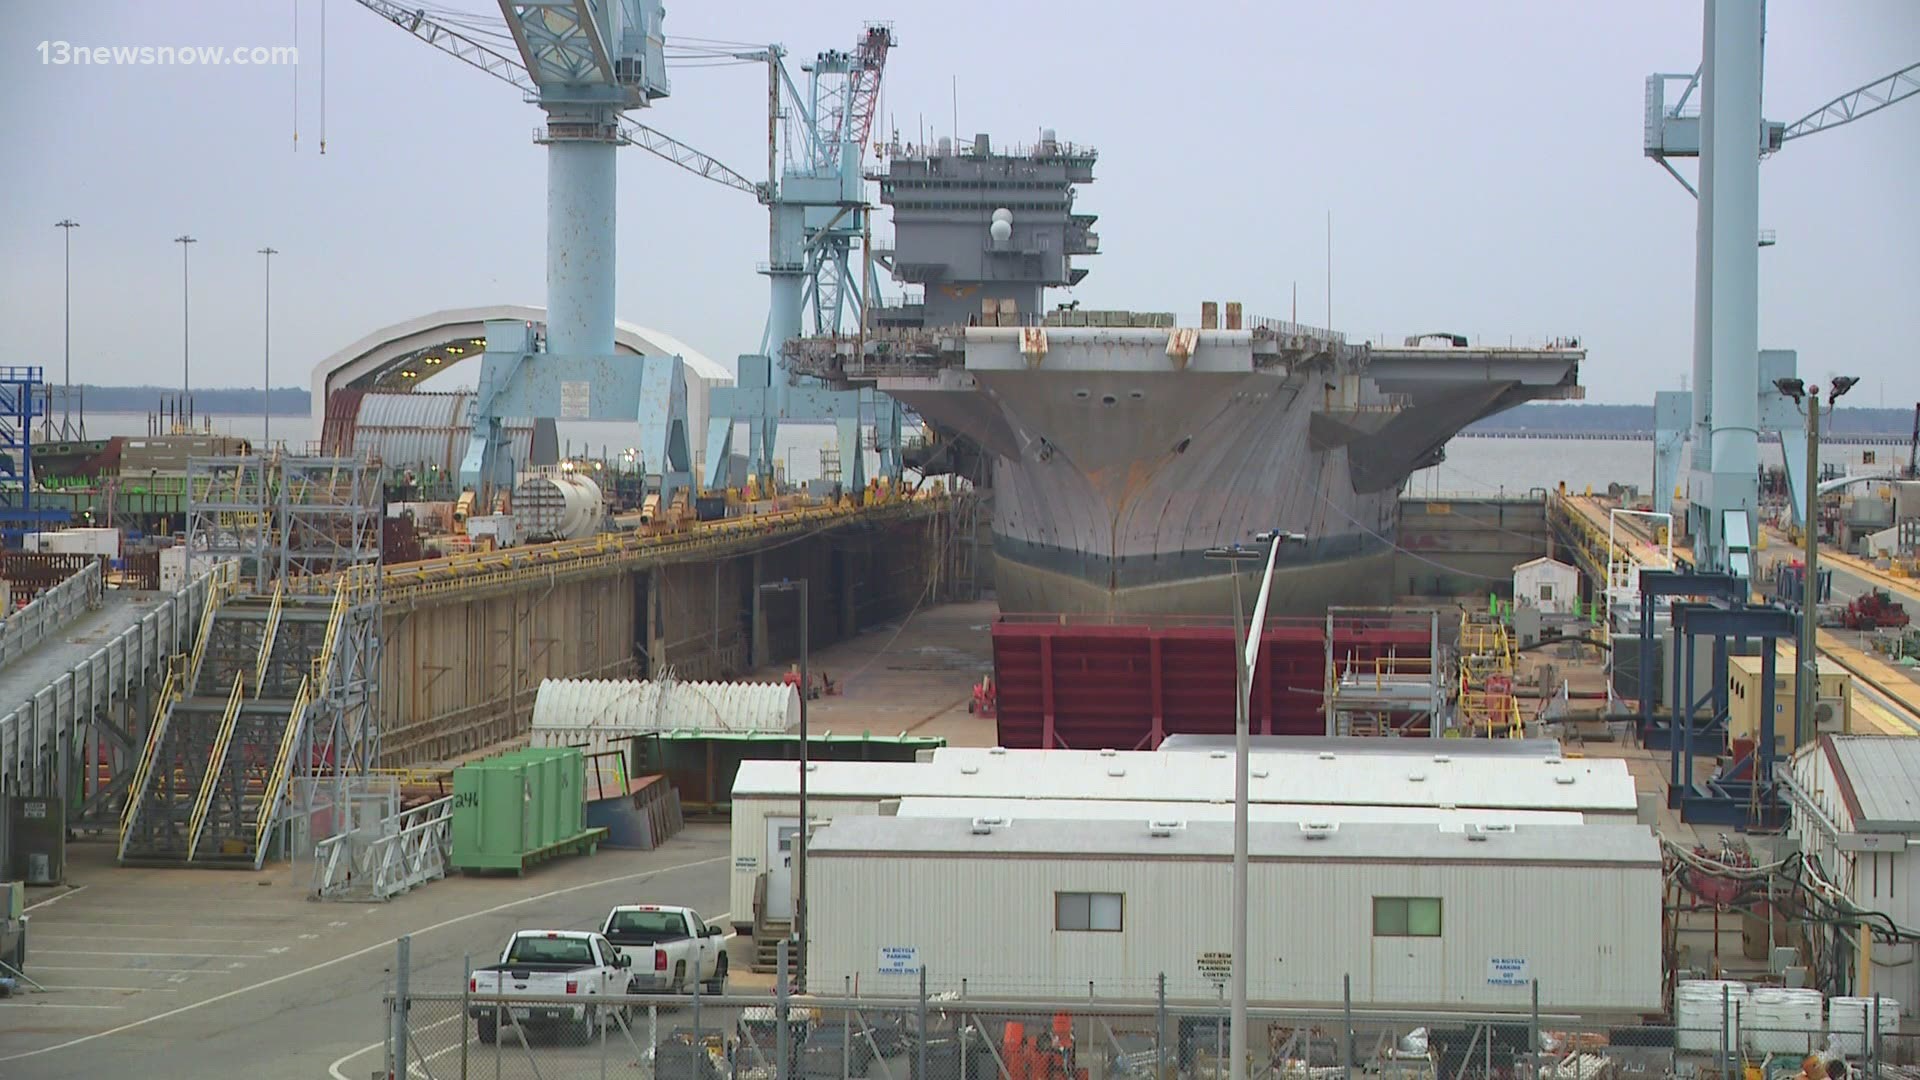 Newport News Shipbuilding said it would be laying off 314 people as part of a "workforce reduction."